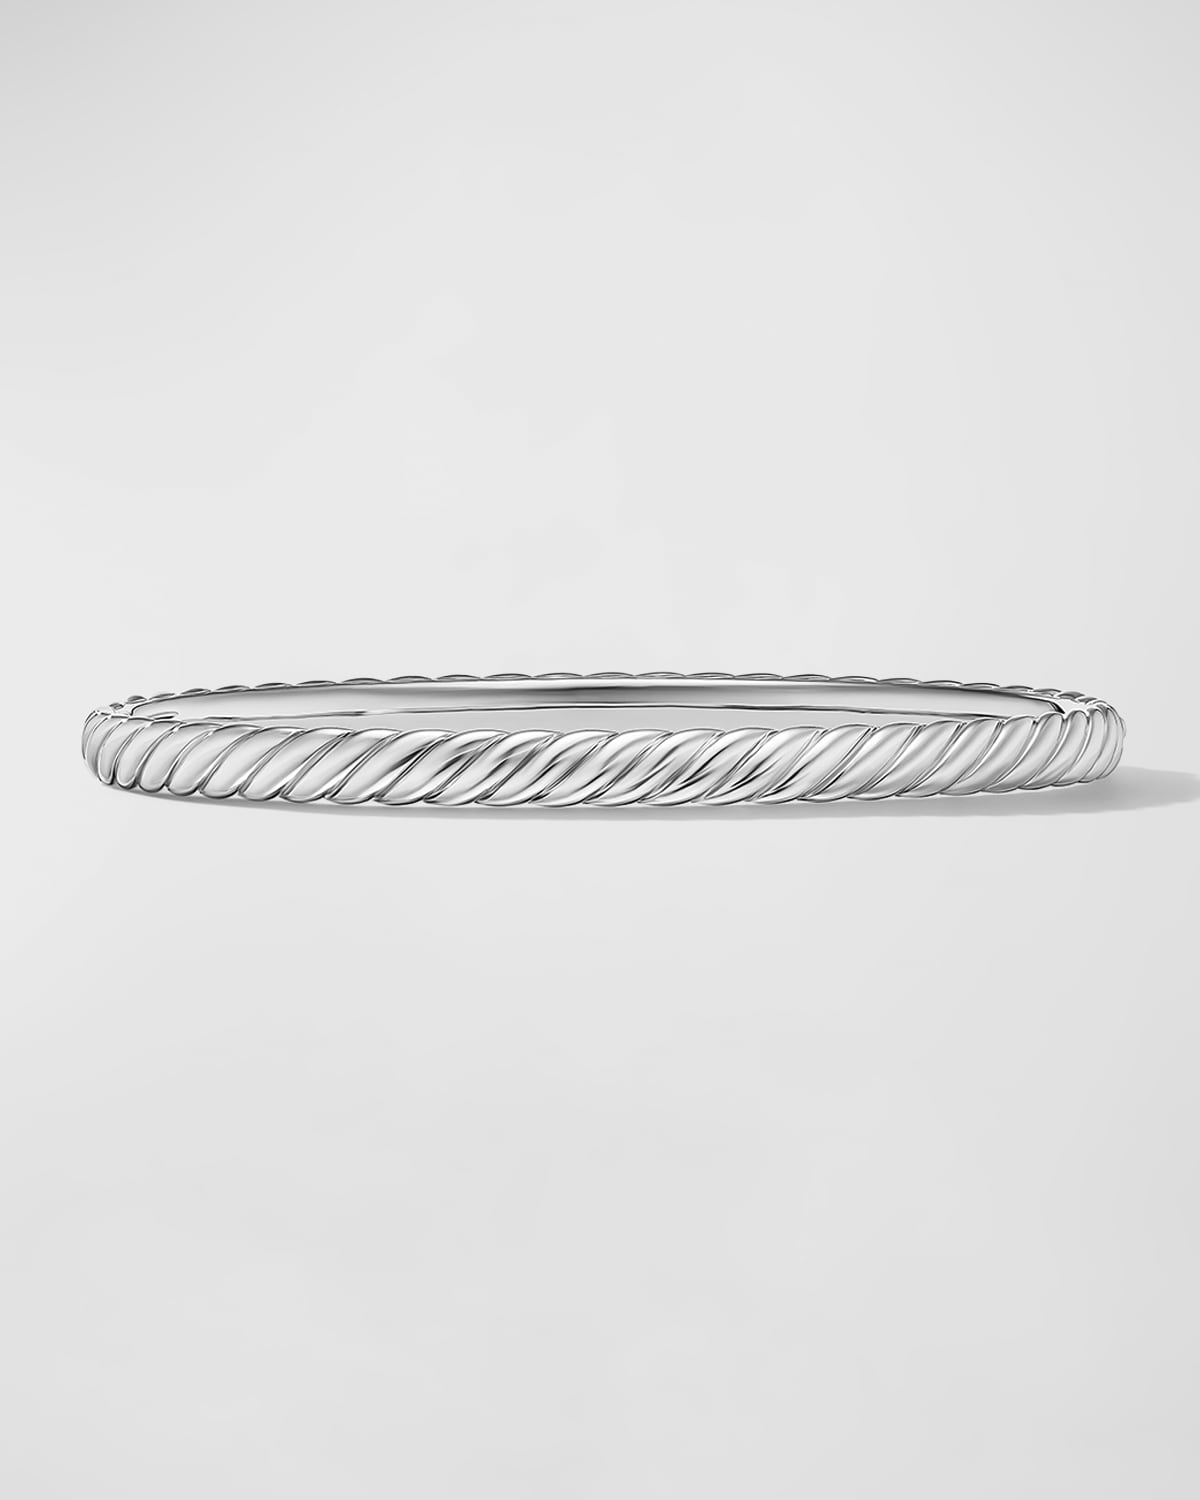 David Yurman Sculpted Cable Bracelet in 18K White Gold, 4.5mm, Size M